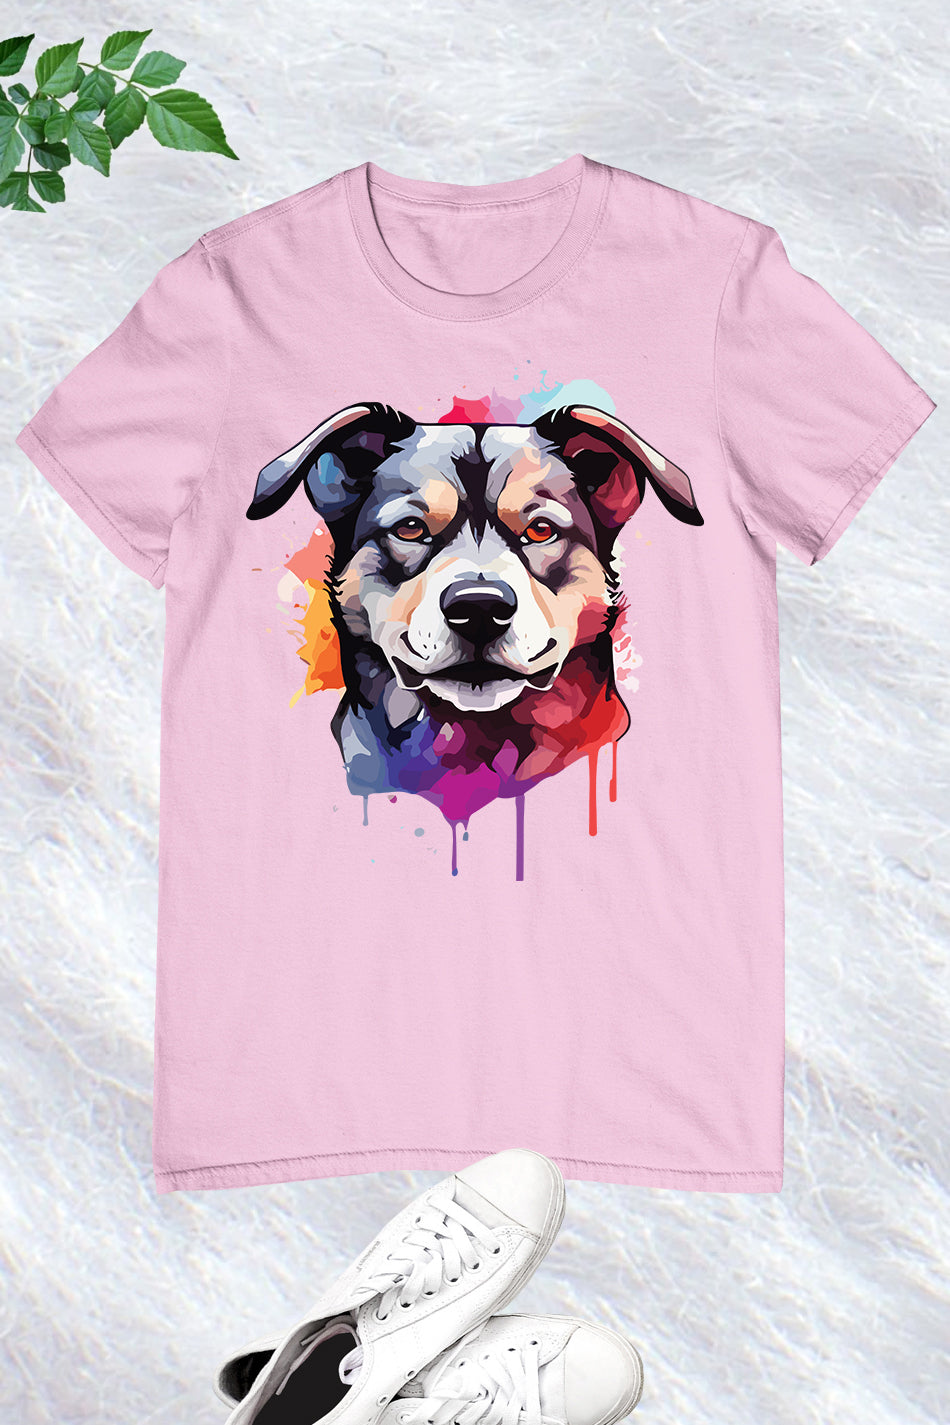 Experience the artistic beauty of our Water Color Dog T-Shirt. Made from the highest quality materials, this t-shirt features a vibrant watercolor dog design that is both stylish and comfortable. Express your love for dogs and art with this unique t-shirt.